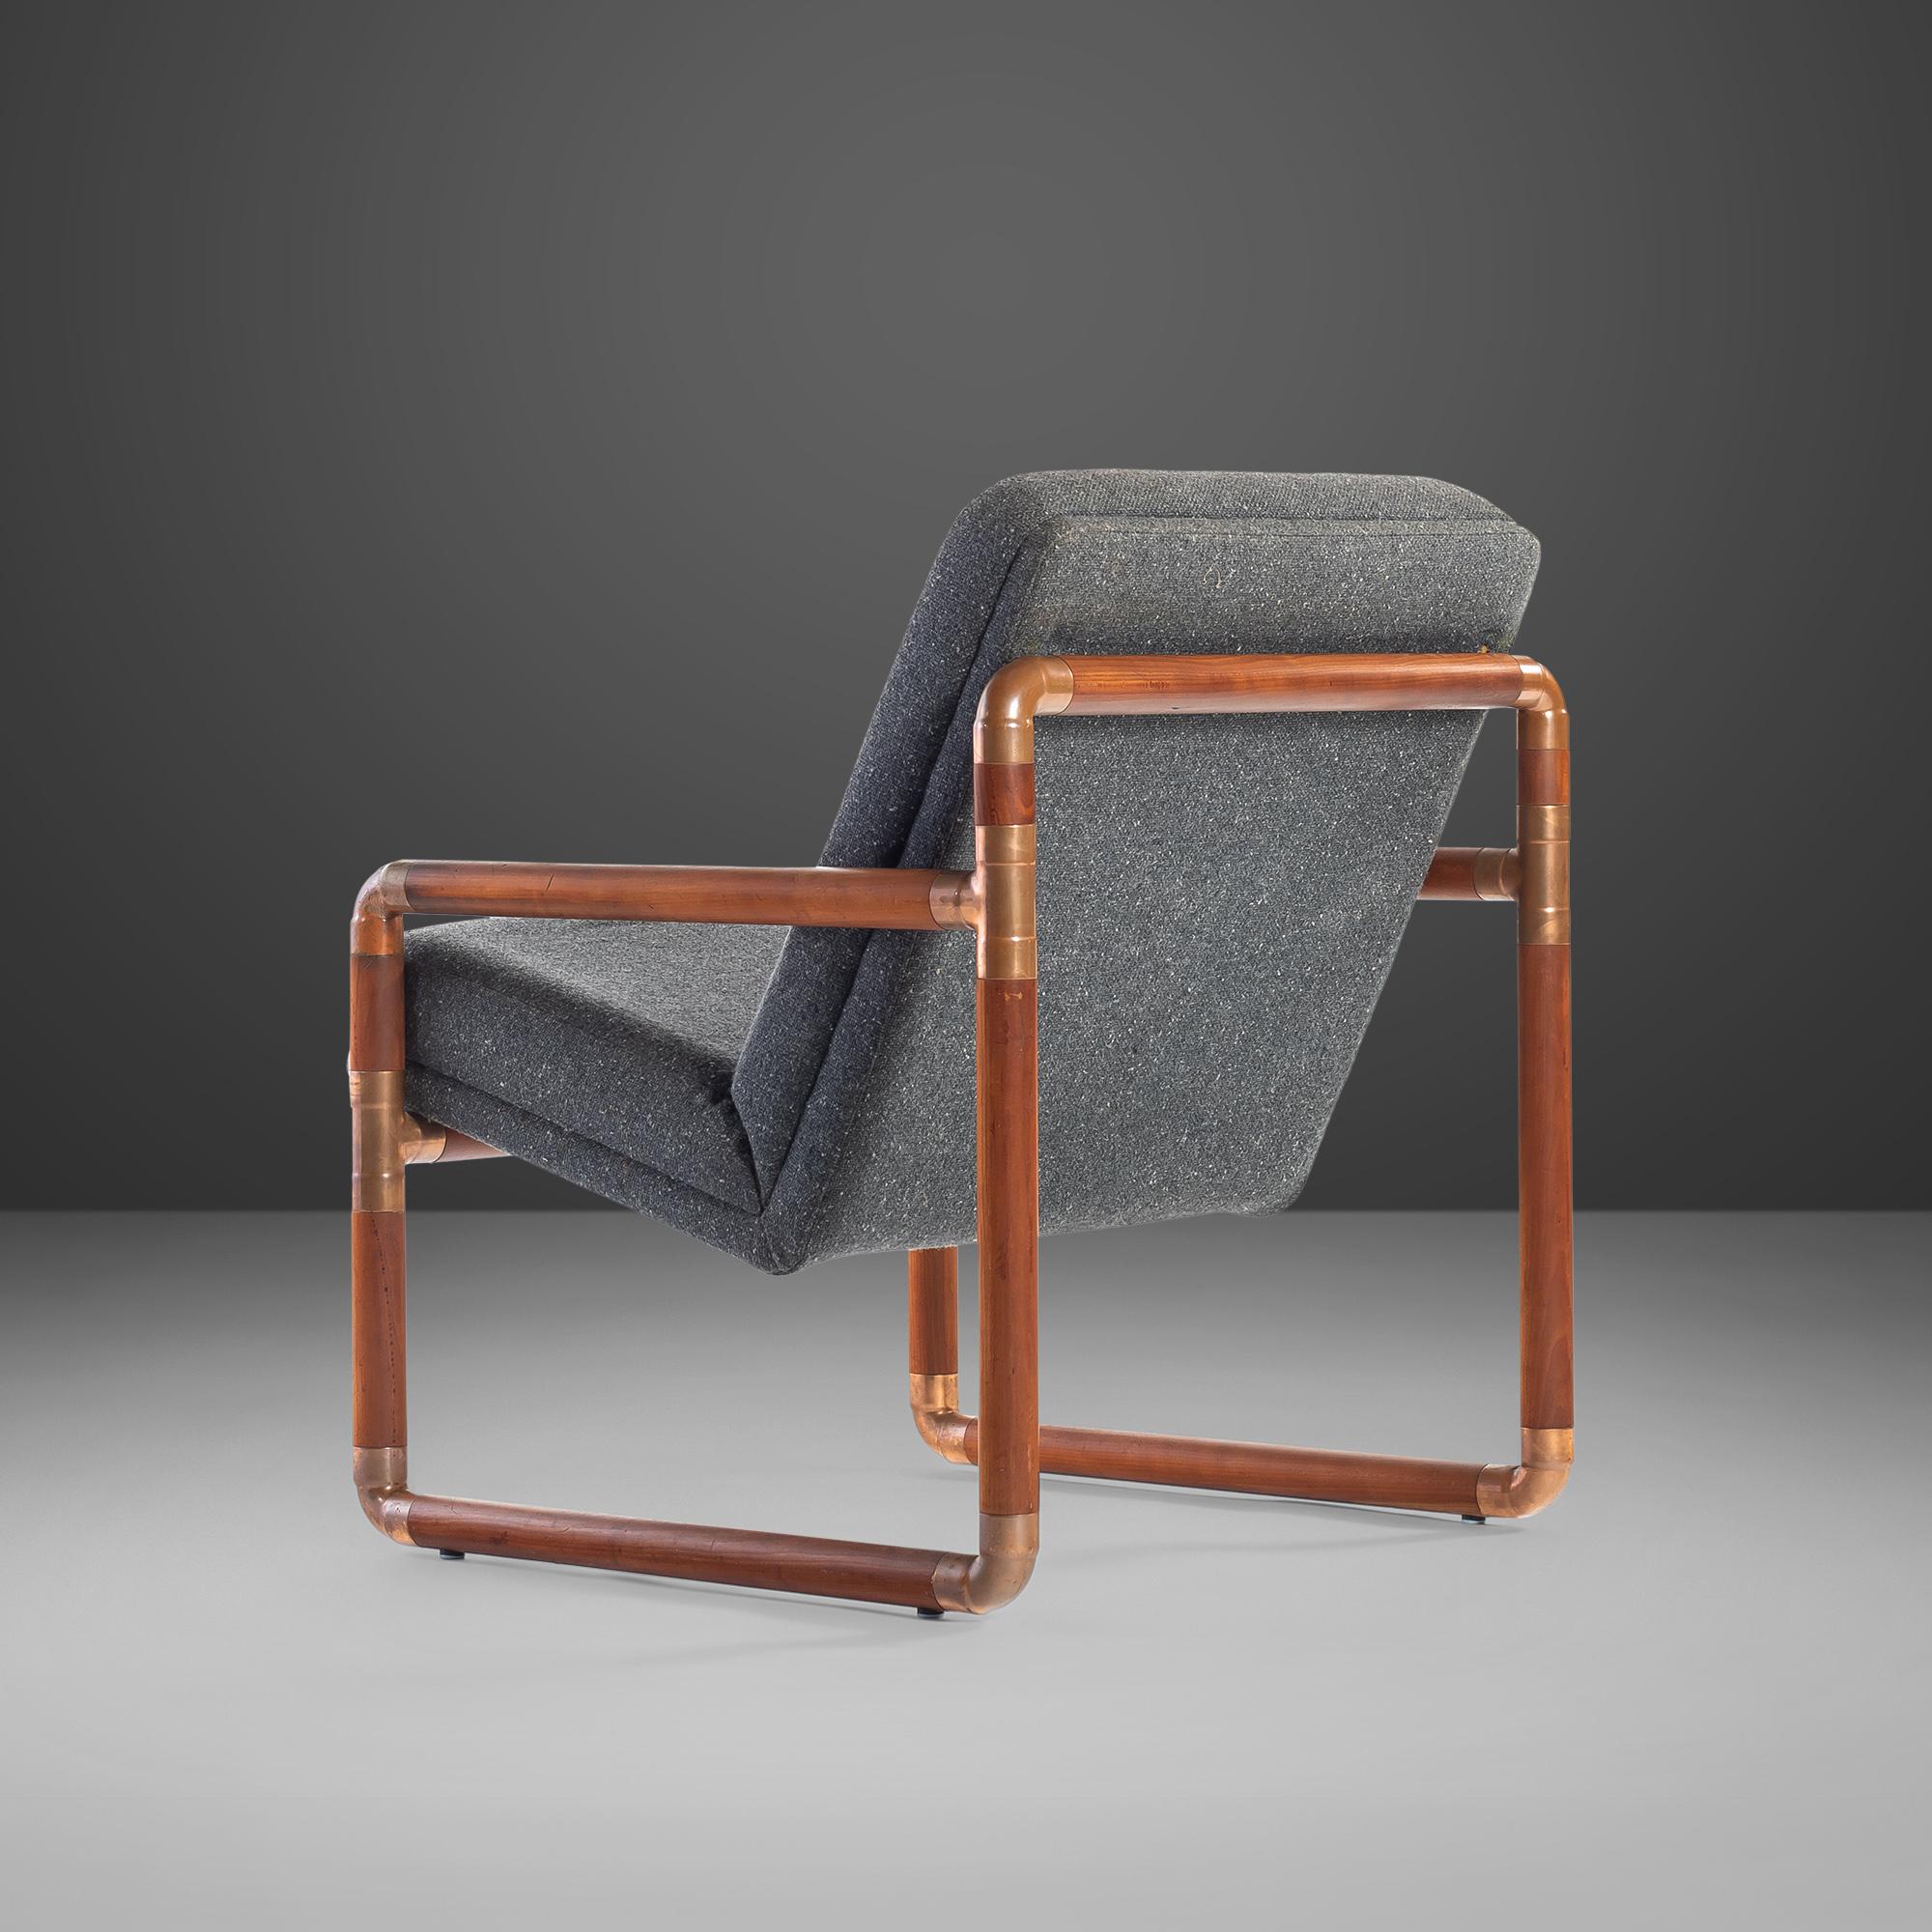 Unique Industrial Brass and Walnut Lounge Chair w/ Gray Tweed Upholstery, USA For Sale 9